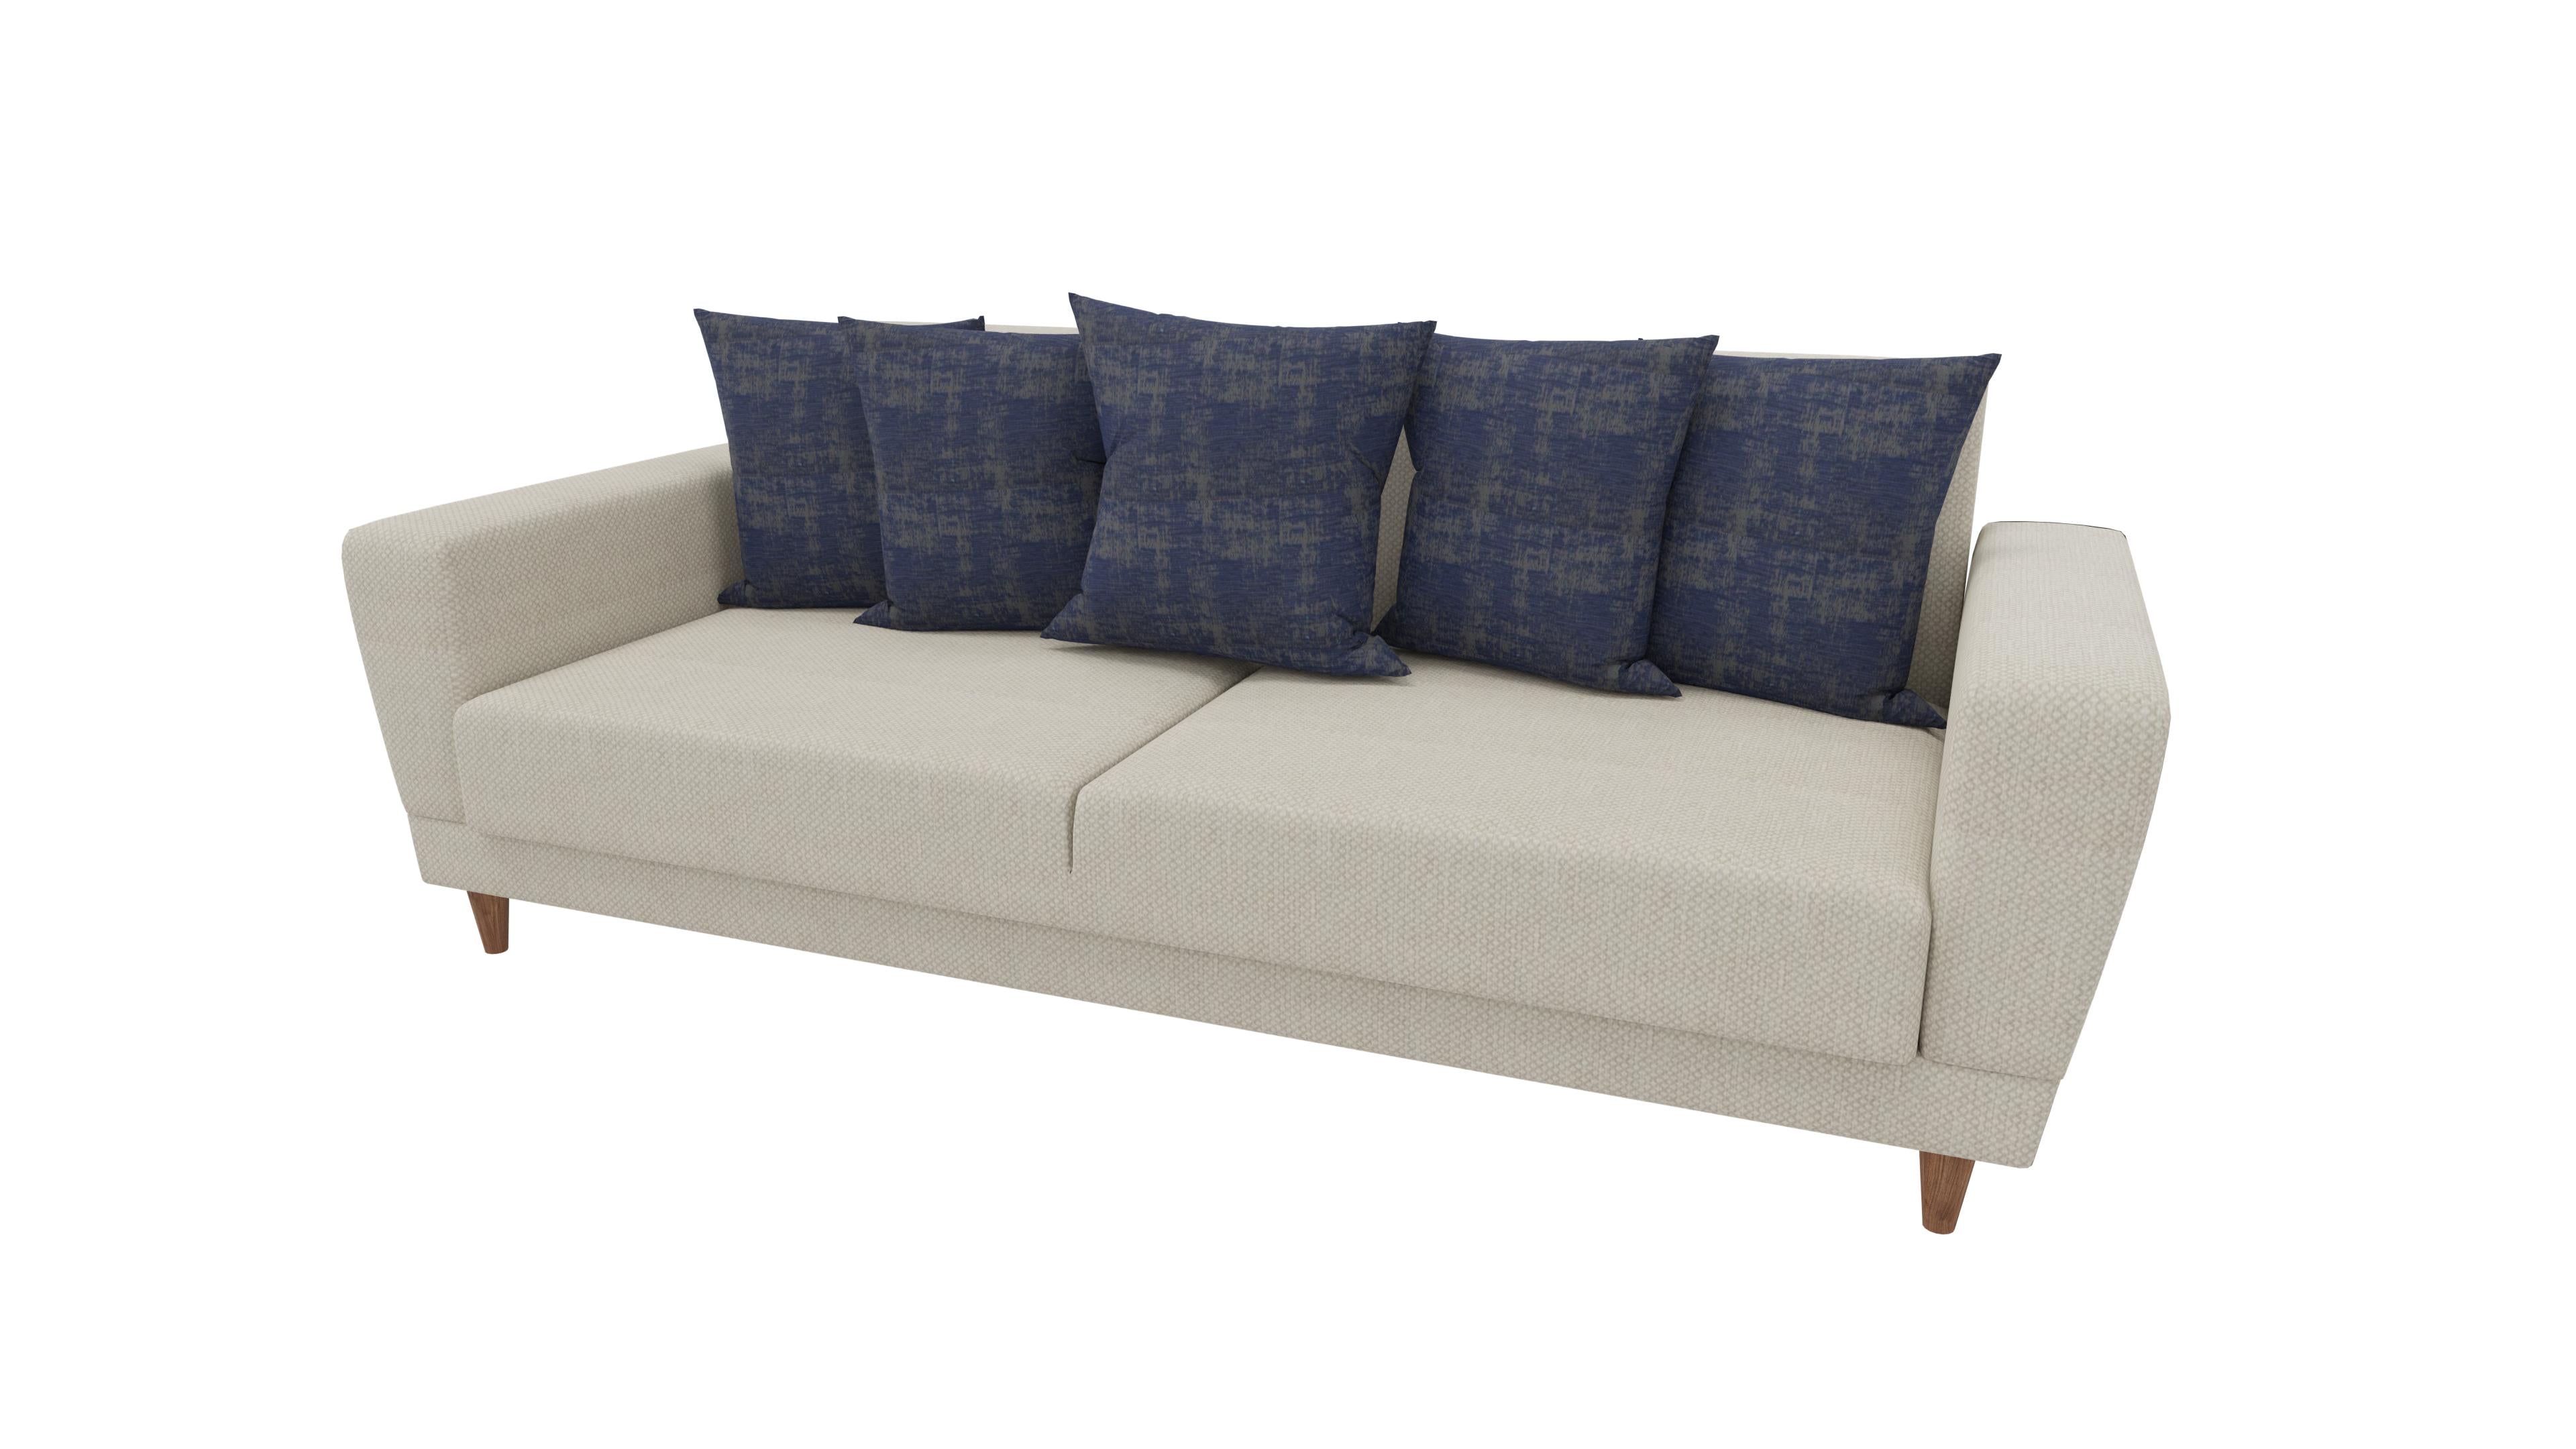 Enza Dolce 3 Seater Sofa Bed - 2003 - K1 - 10701 Cream - AR:101 (with Navy Blue Cushion) (Special) 1479283